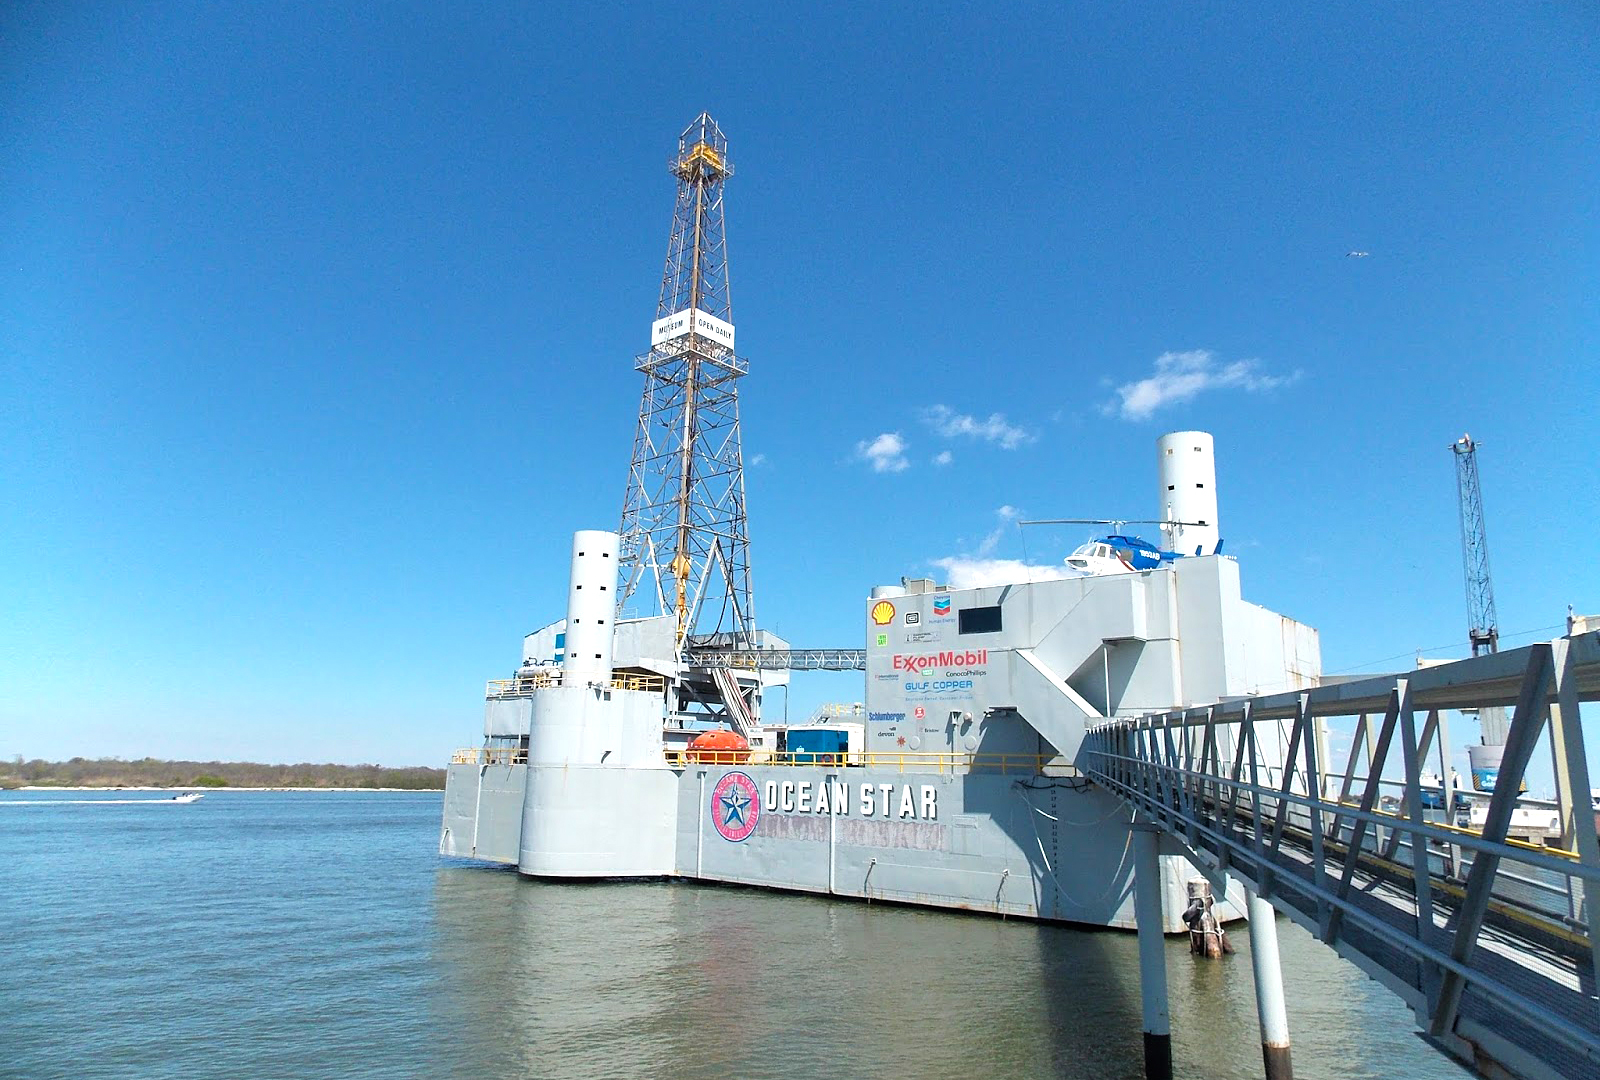 Oceran star offshore drilling rig and museum